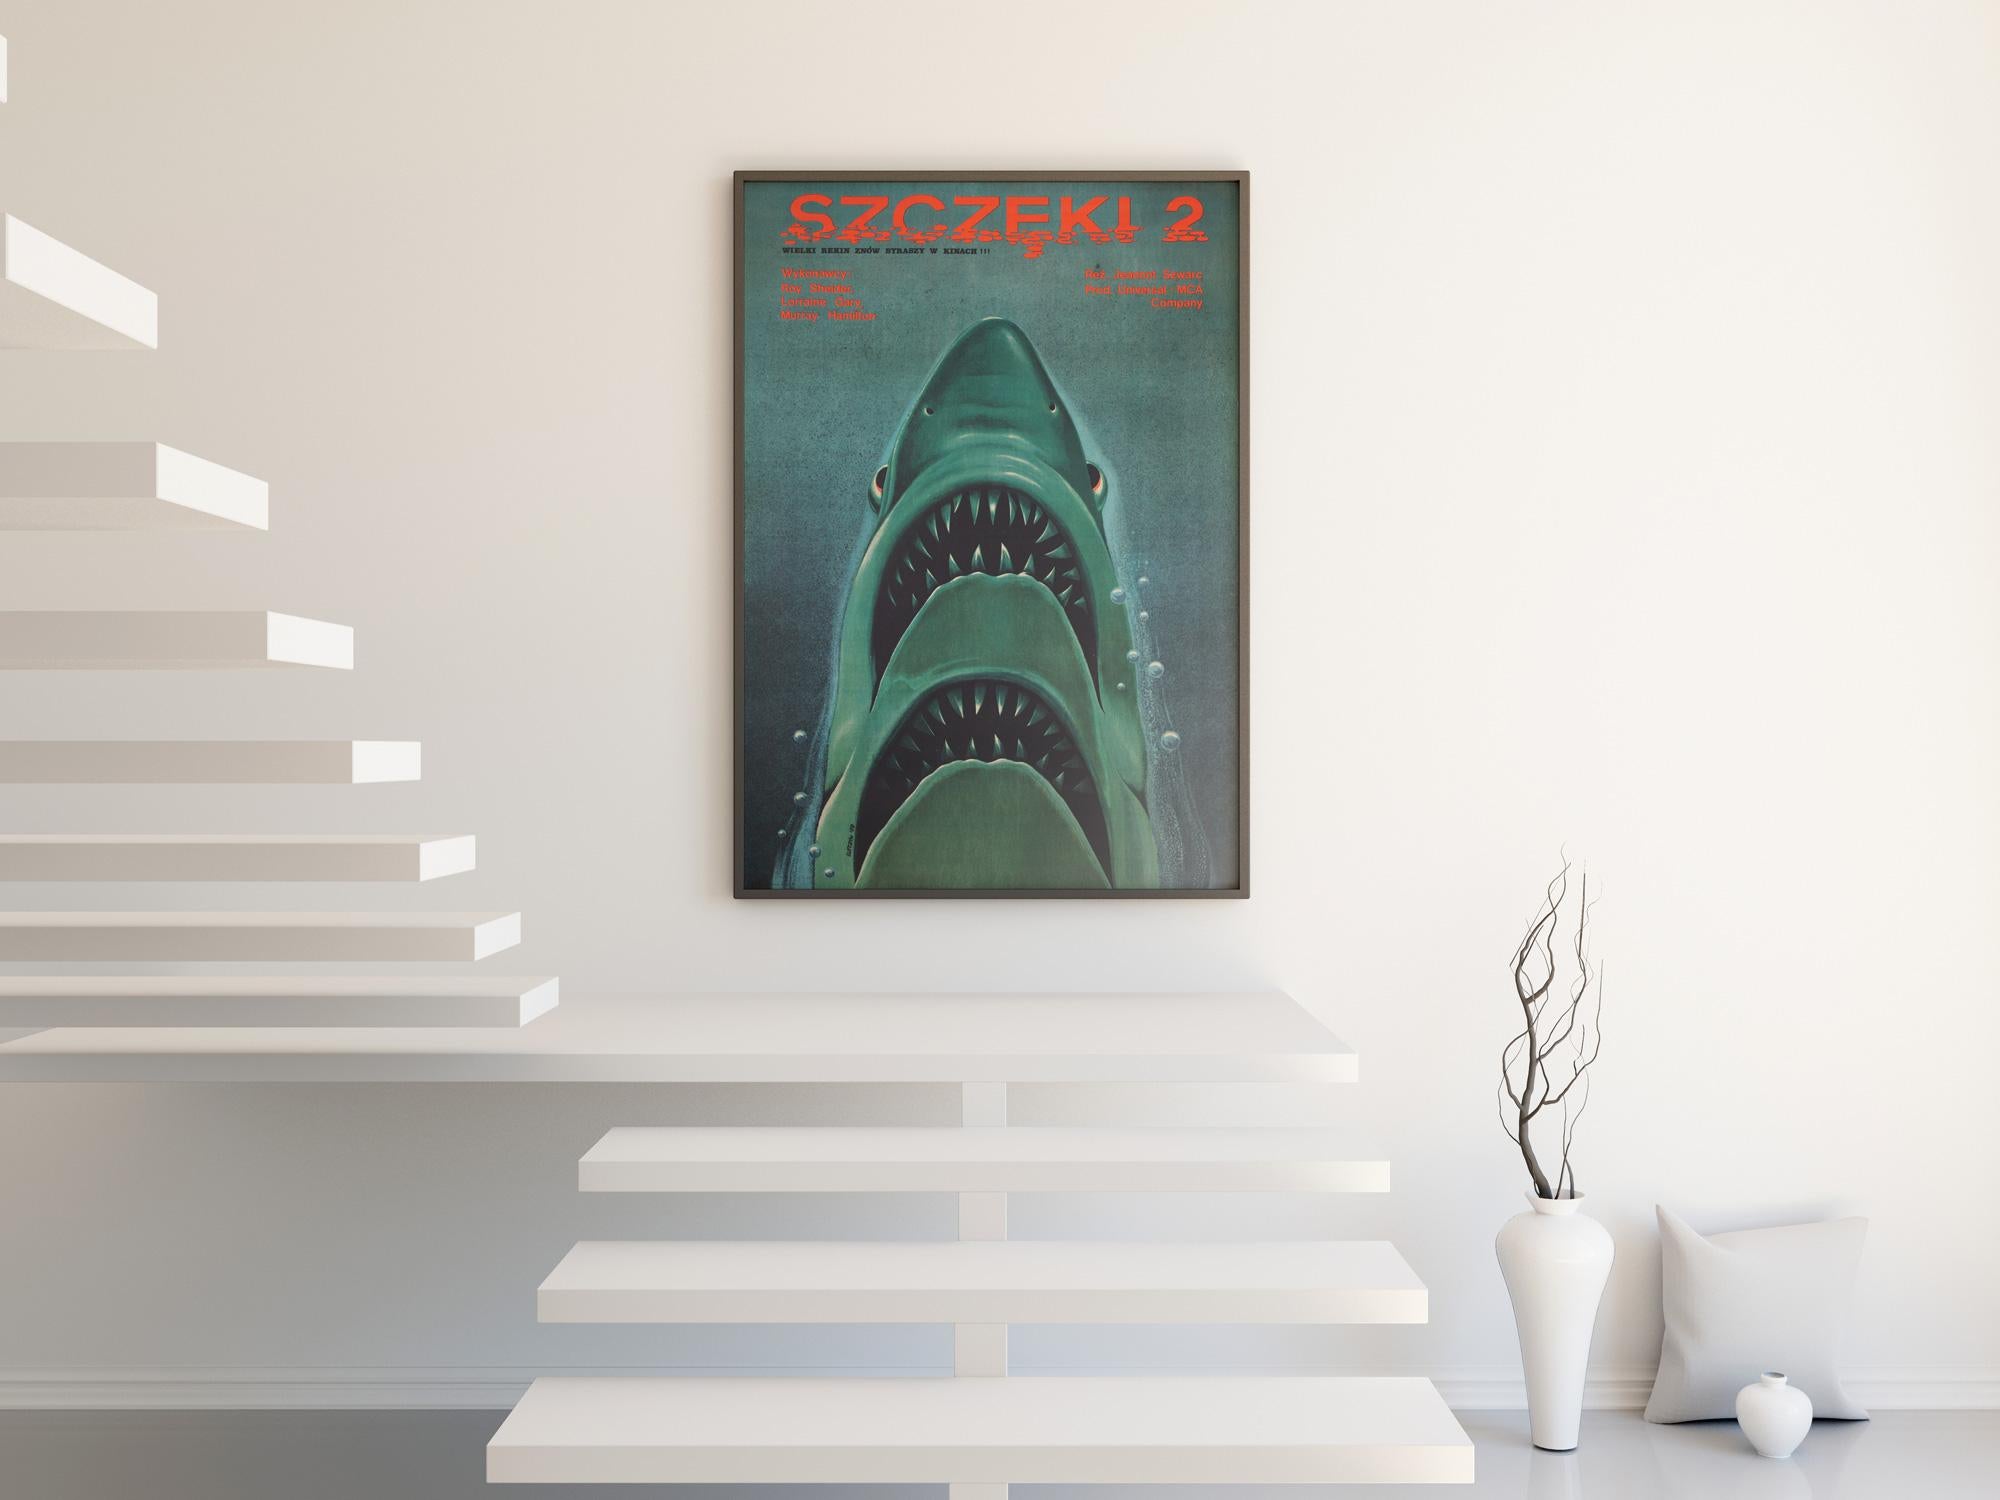 The poster with plenty of bite. Double in fact!

We adore Lutczyn's wonderful double-jawed shark design on the Polish film poster for the Jaws sequel. A very inventive derivative from Kastel's original design for the first film.

This vintage